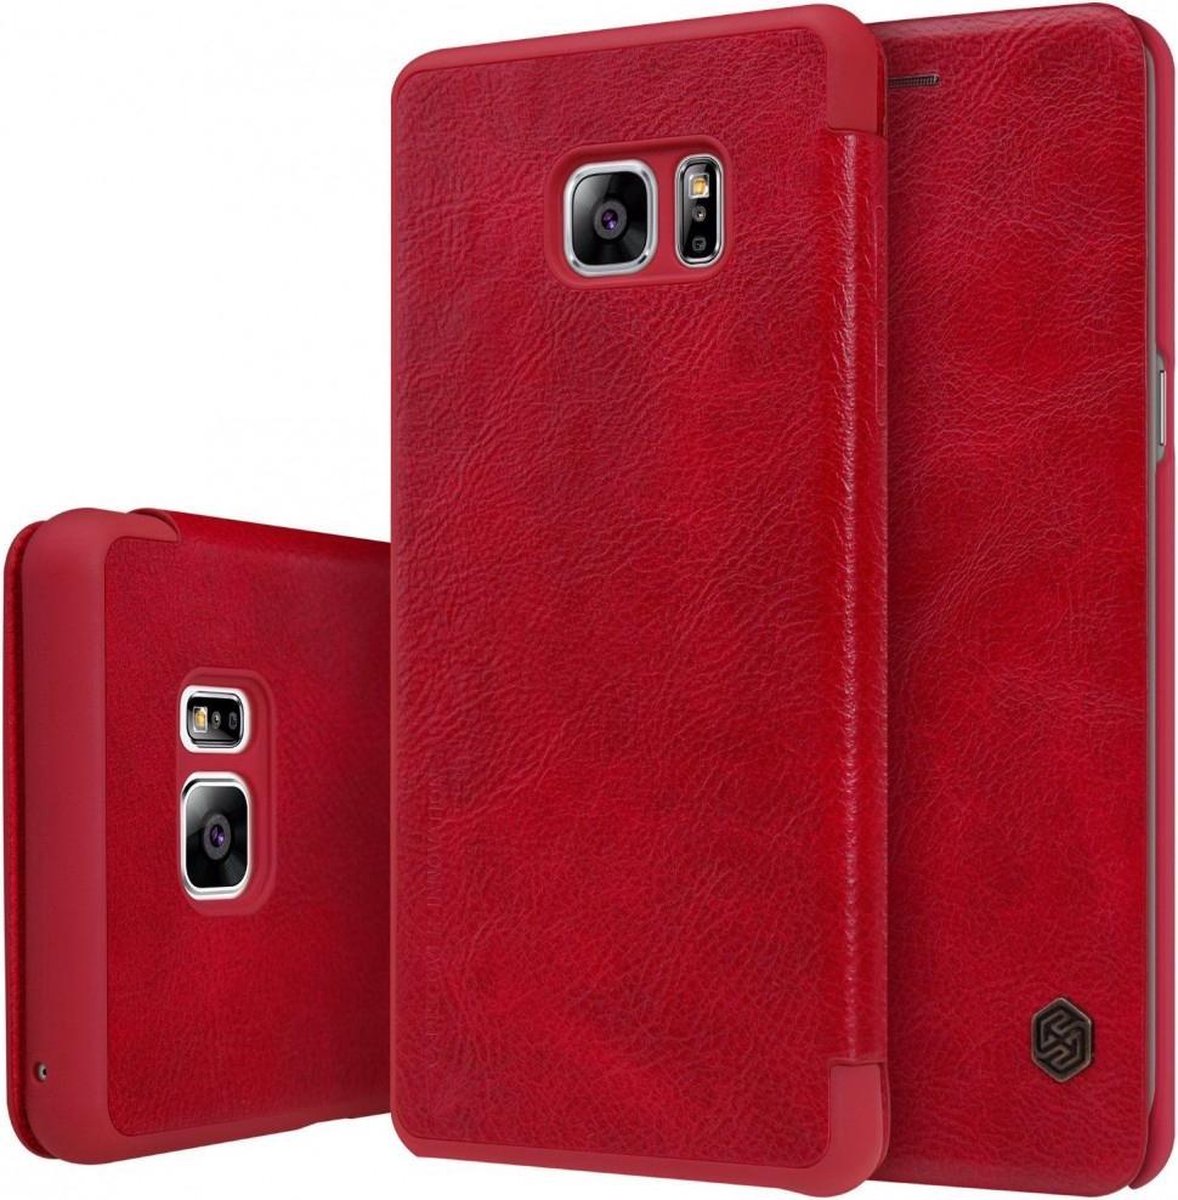 Nillkin Qin Series Leather Case Samsung Galaxy Note 7 - Red